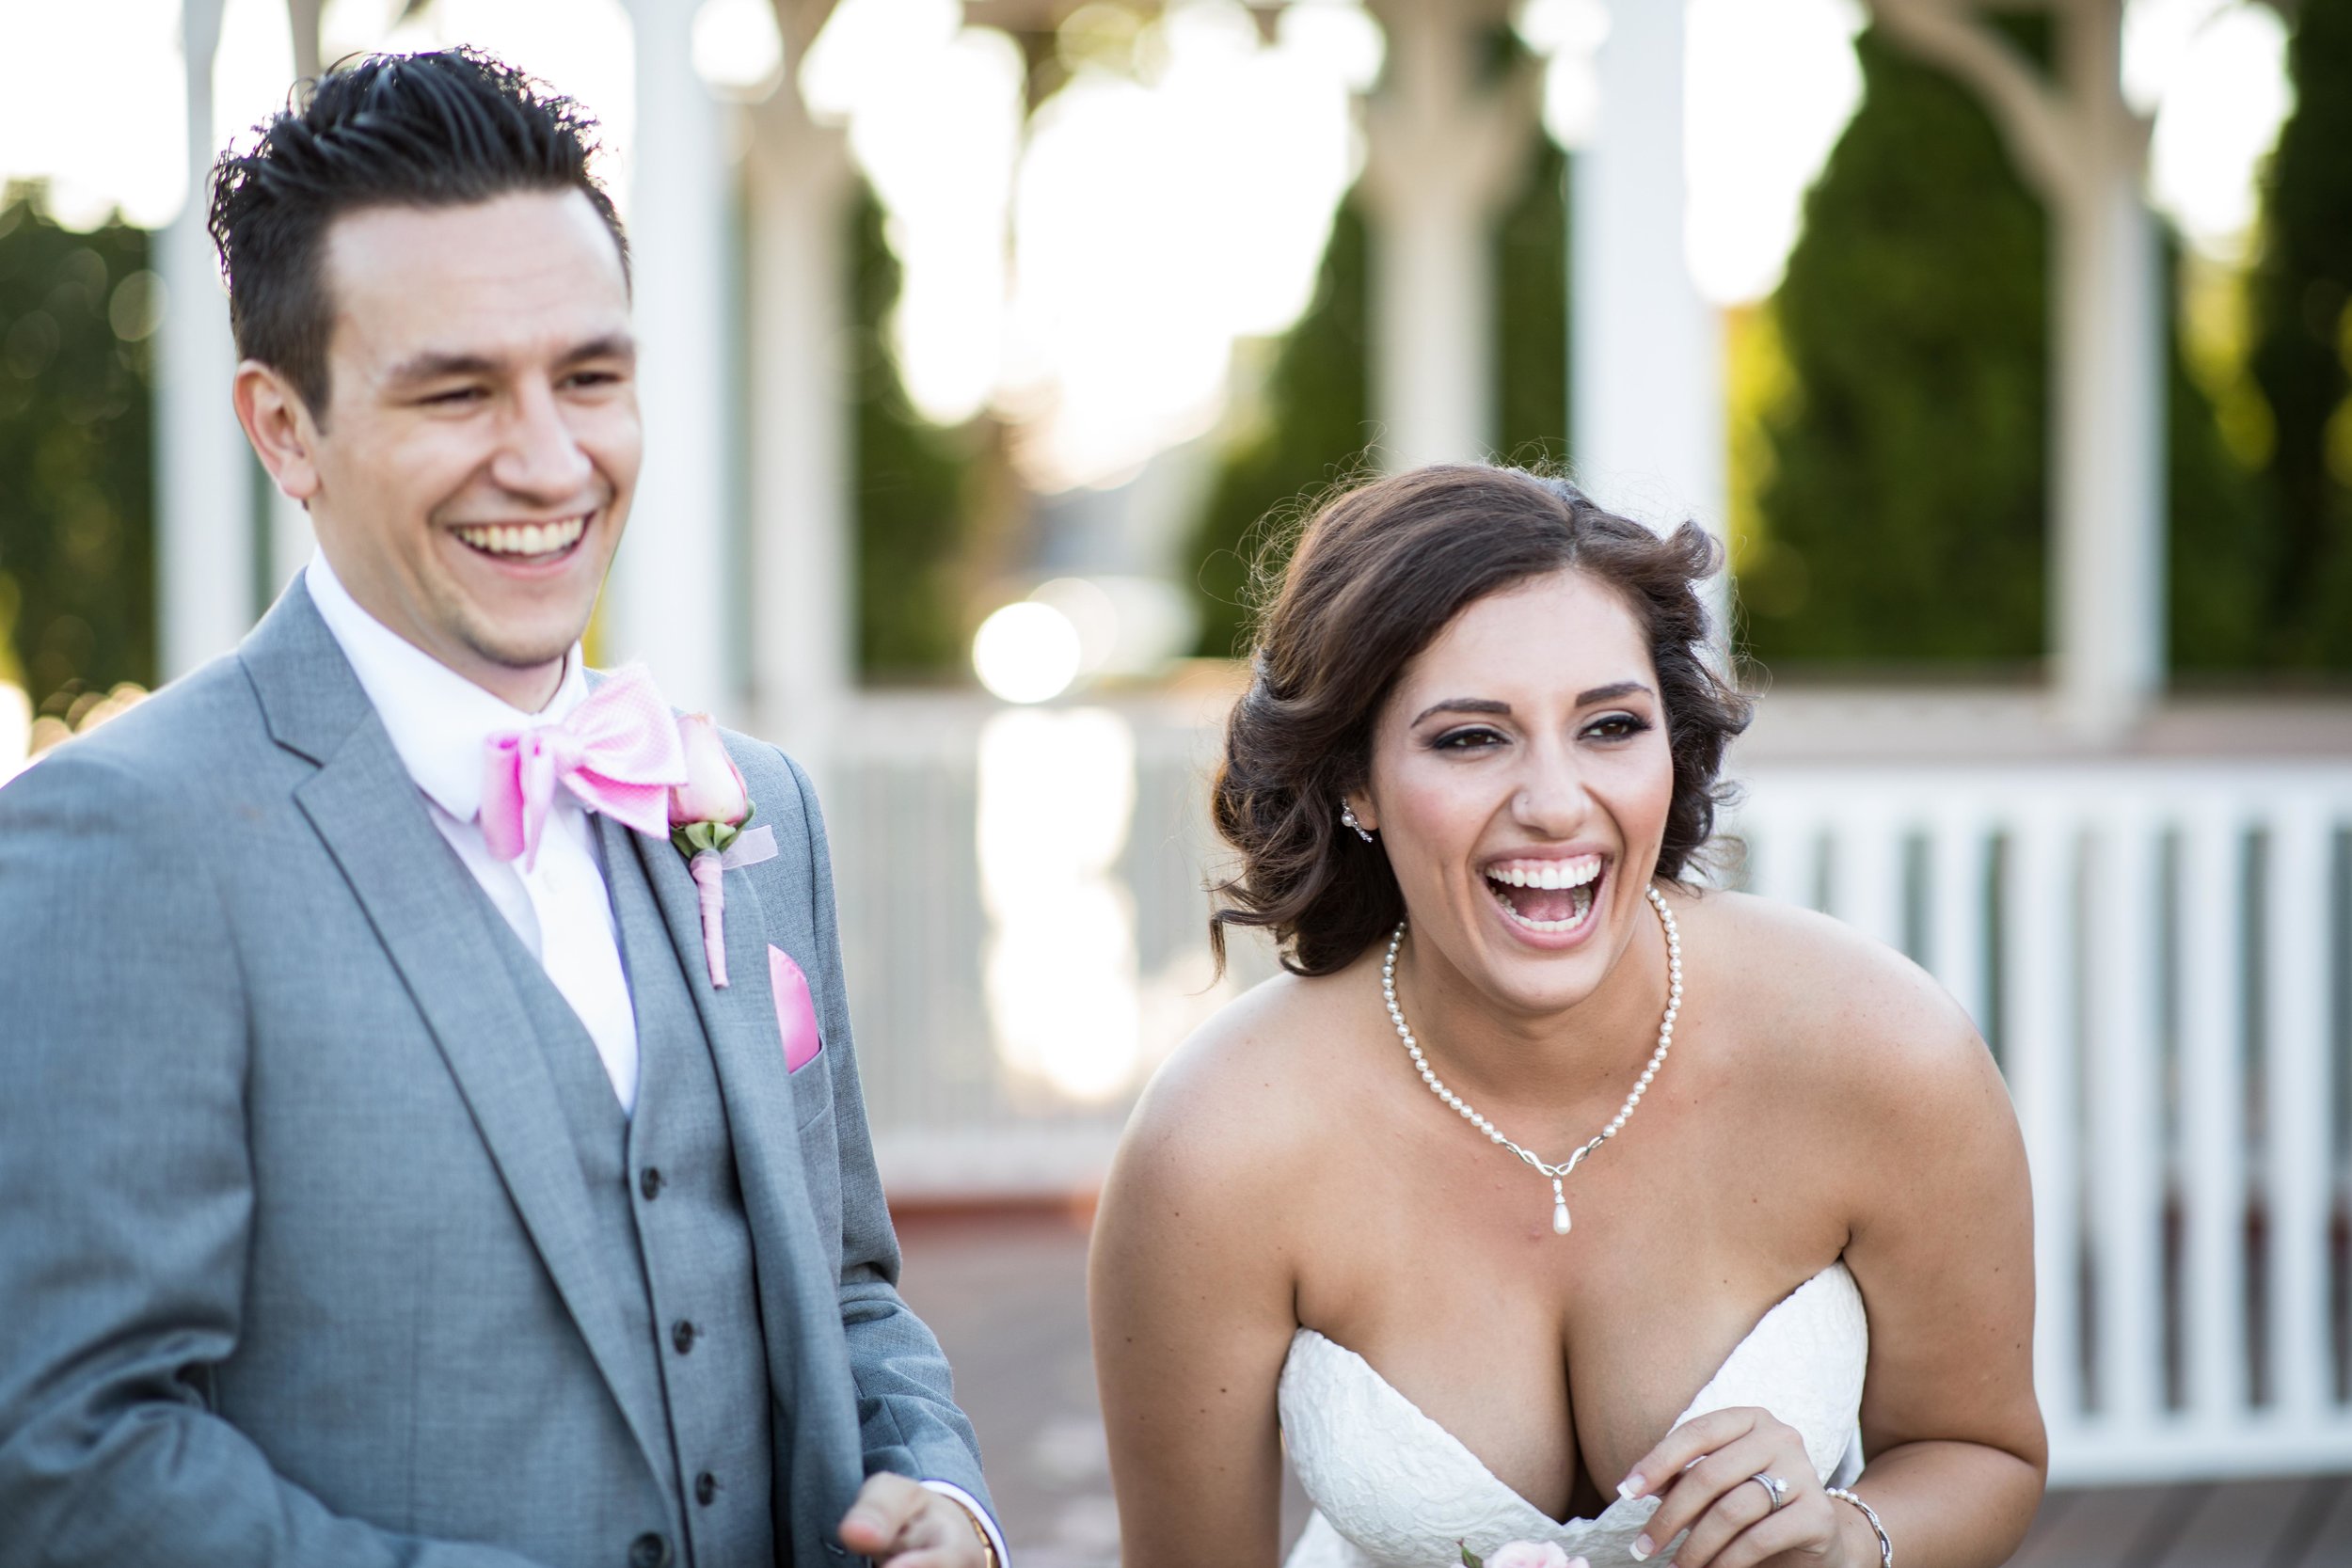 bride and groom laughing during portraits.jpg